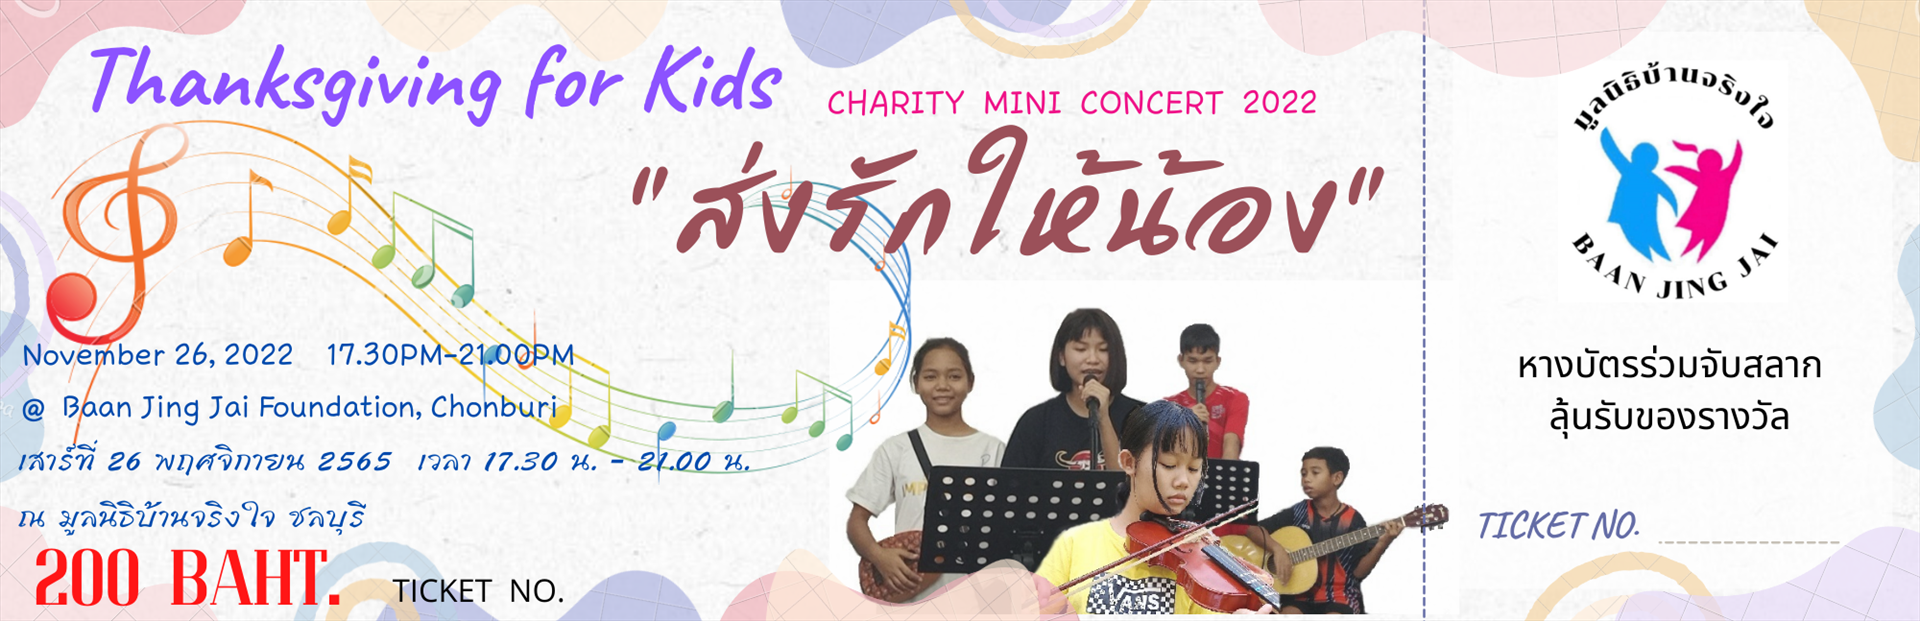 Thanksgiving from kids charity mini concert 2022